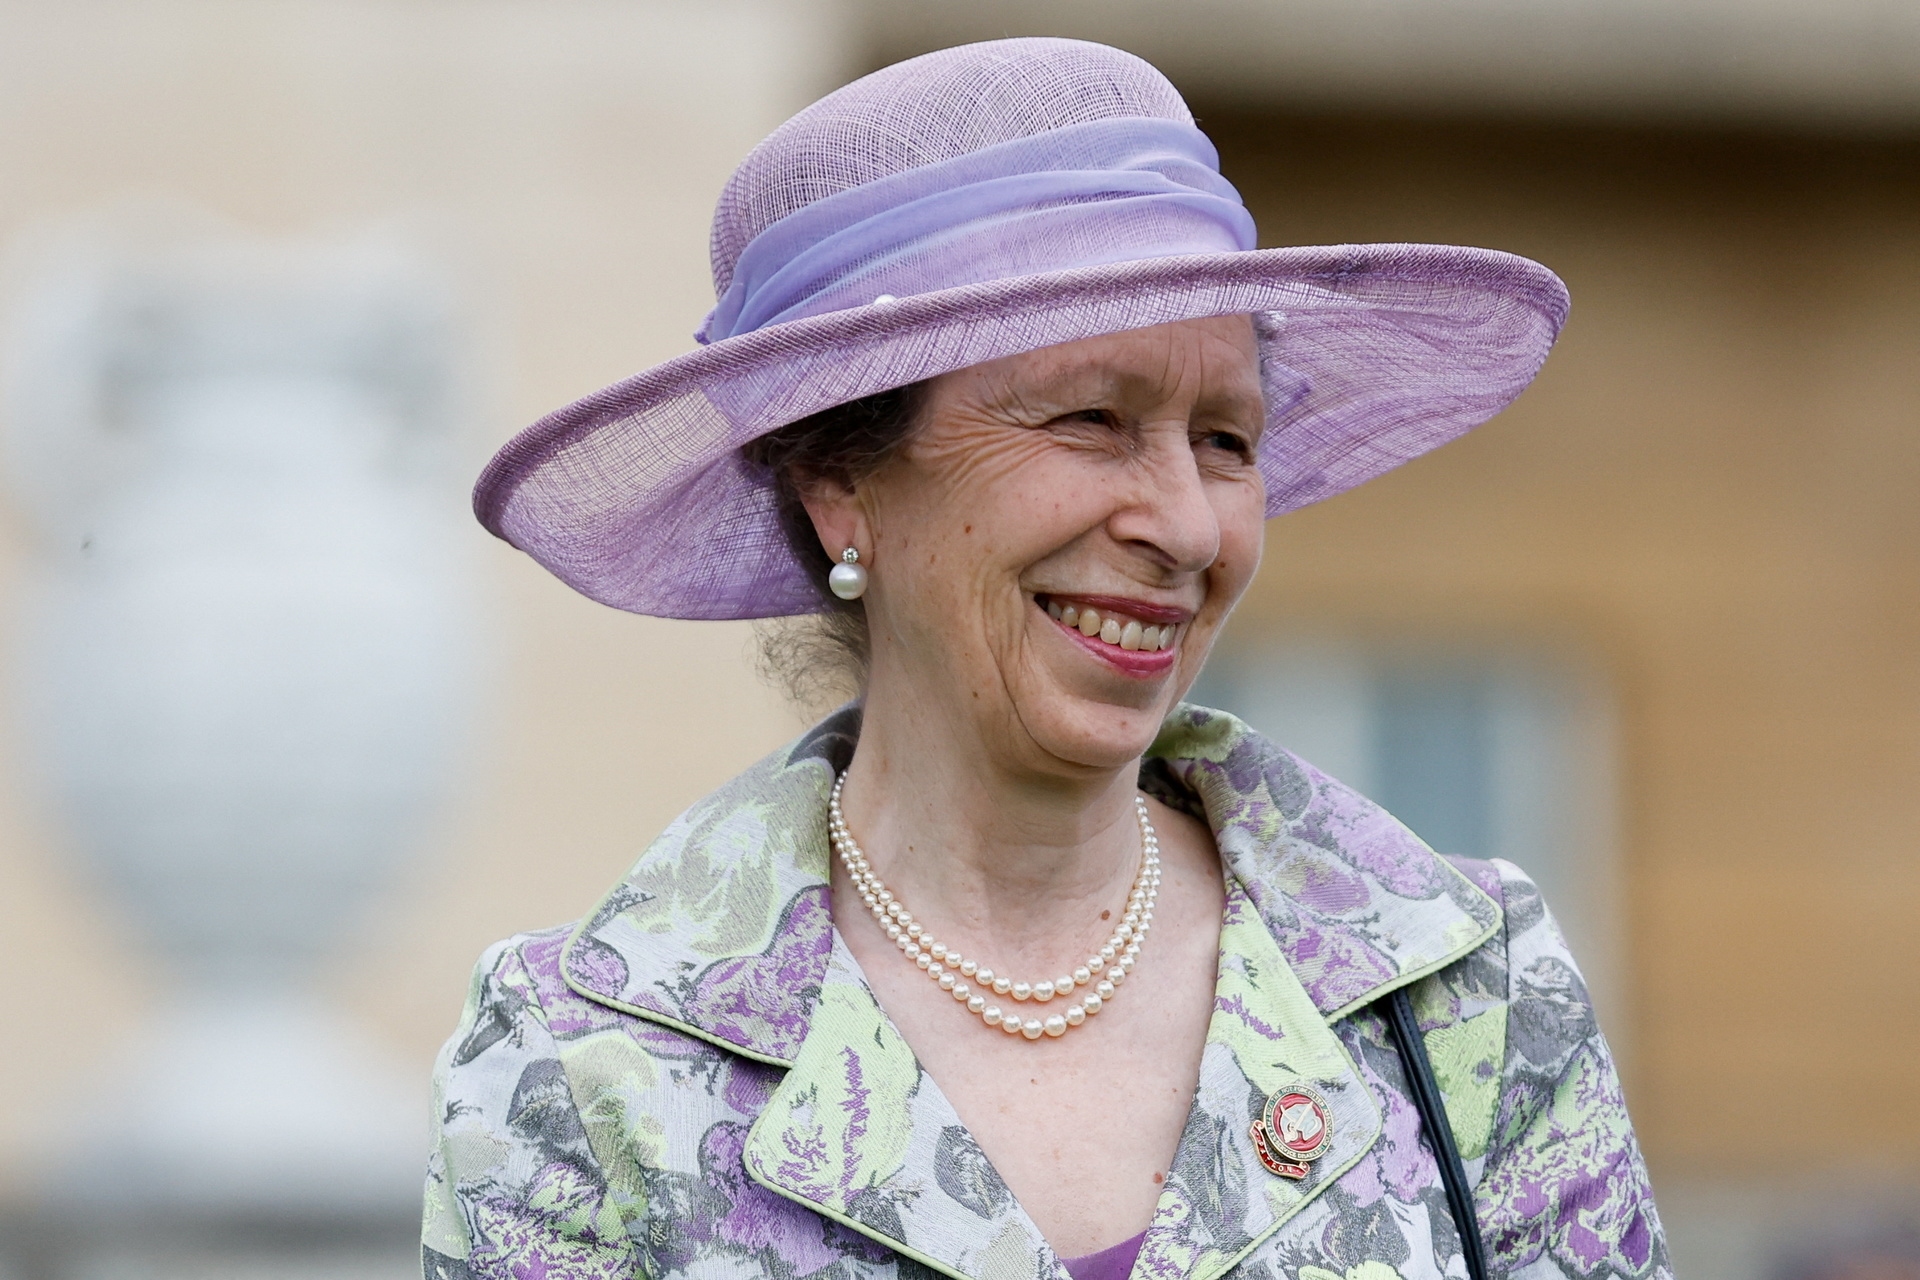 The Princess Royal was the most popular among Scots according to the YouGov poll